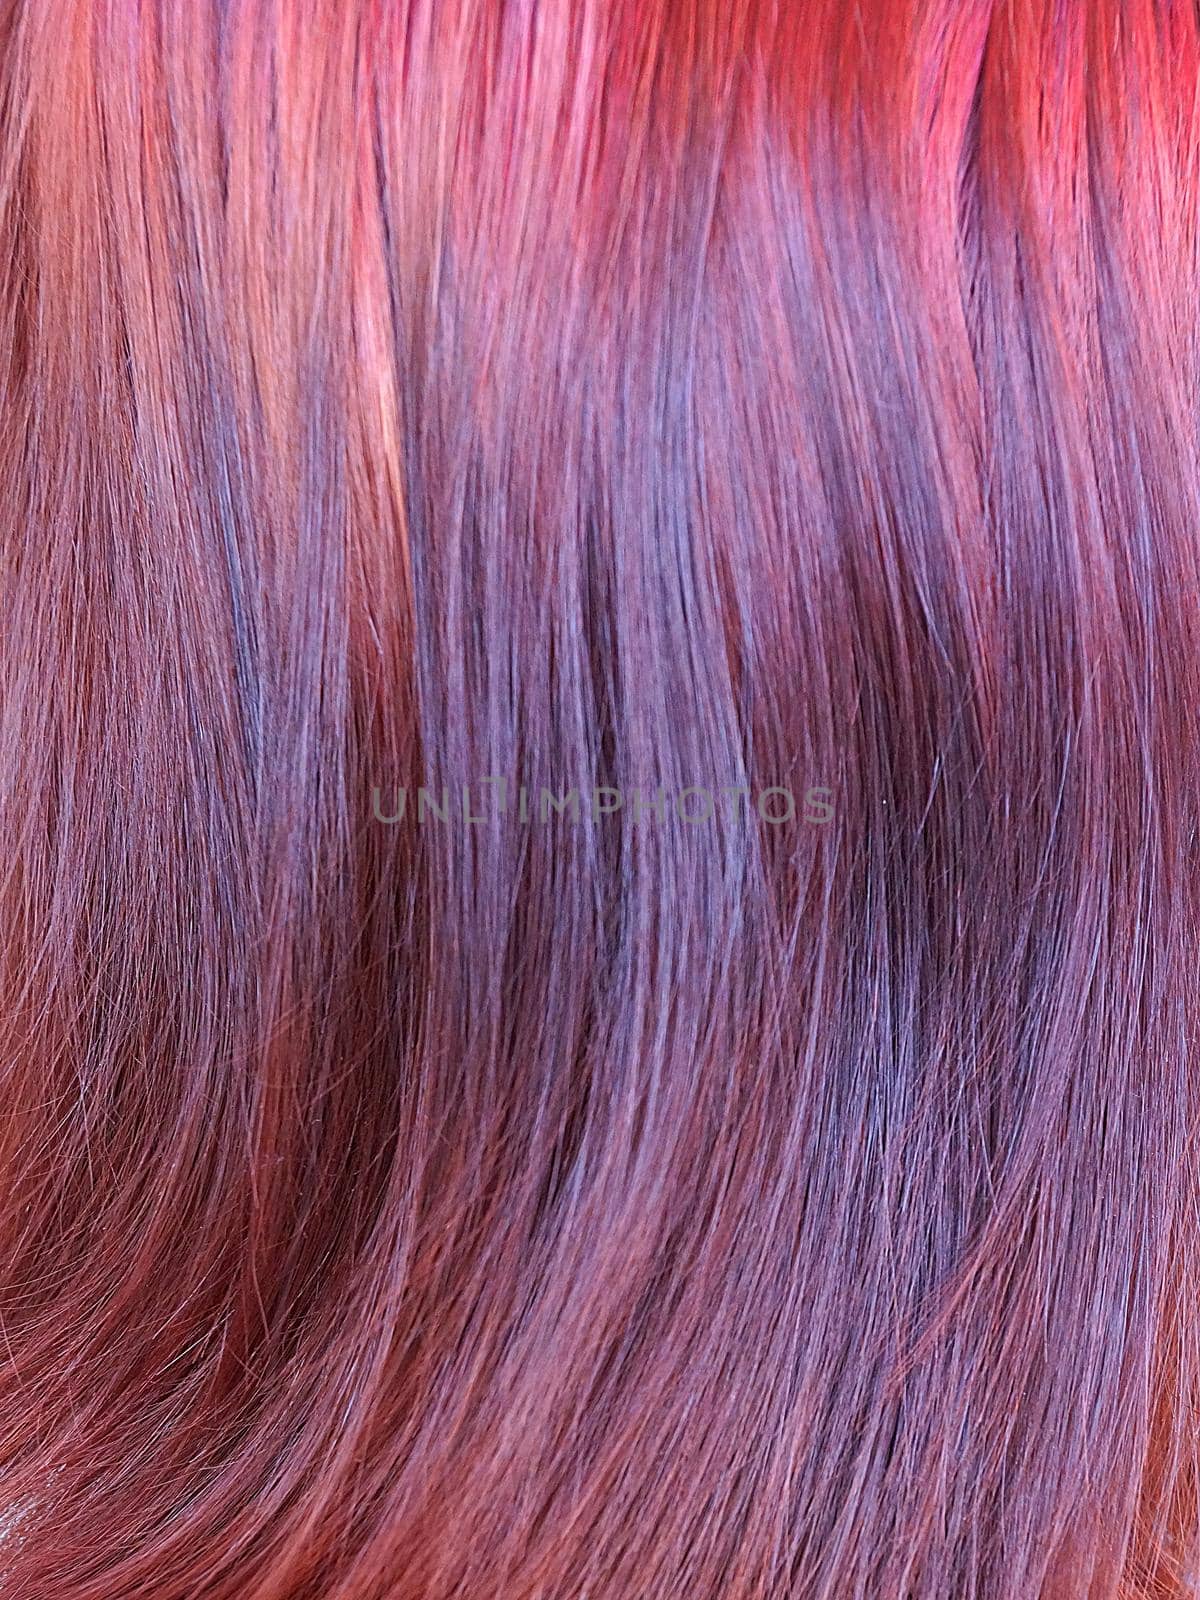 dyed red female hair closeup, texture for background.